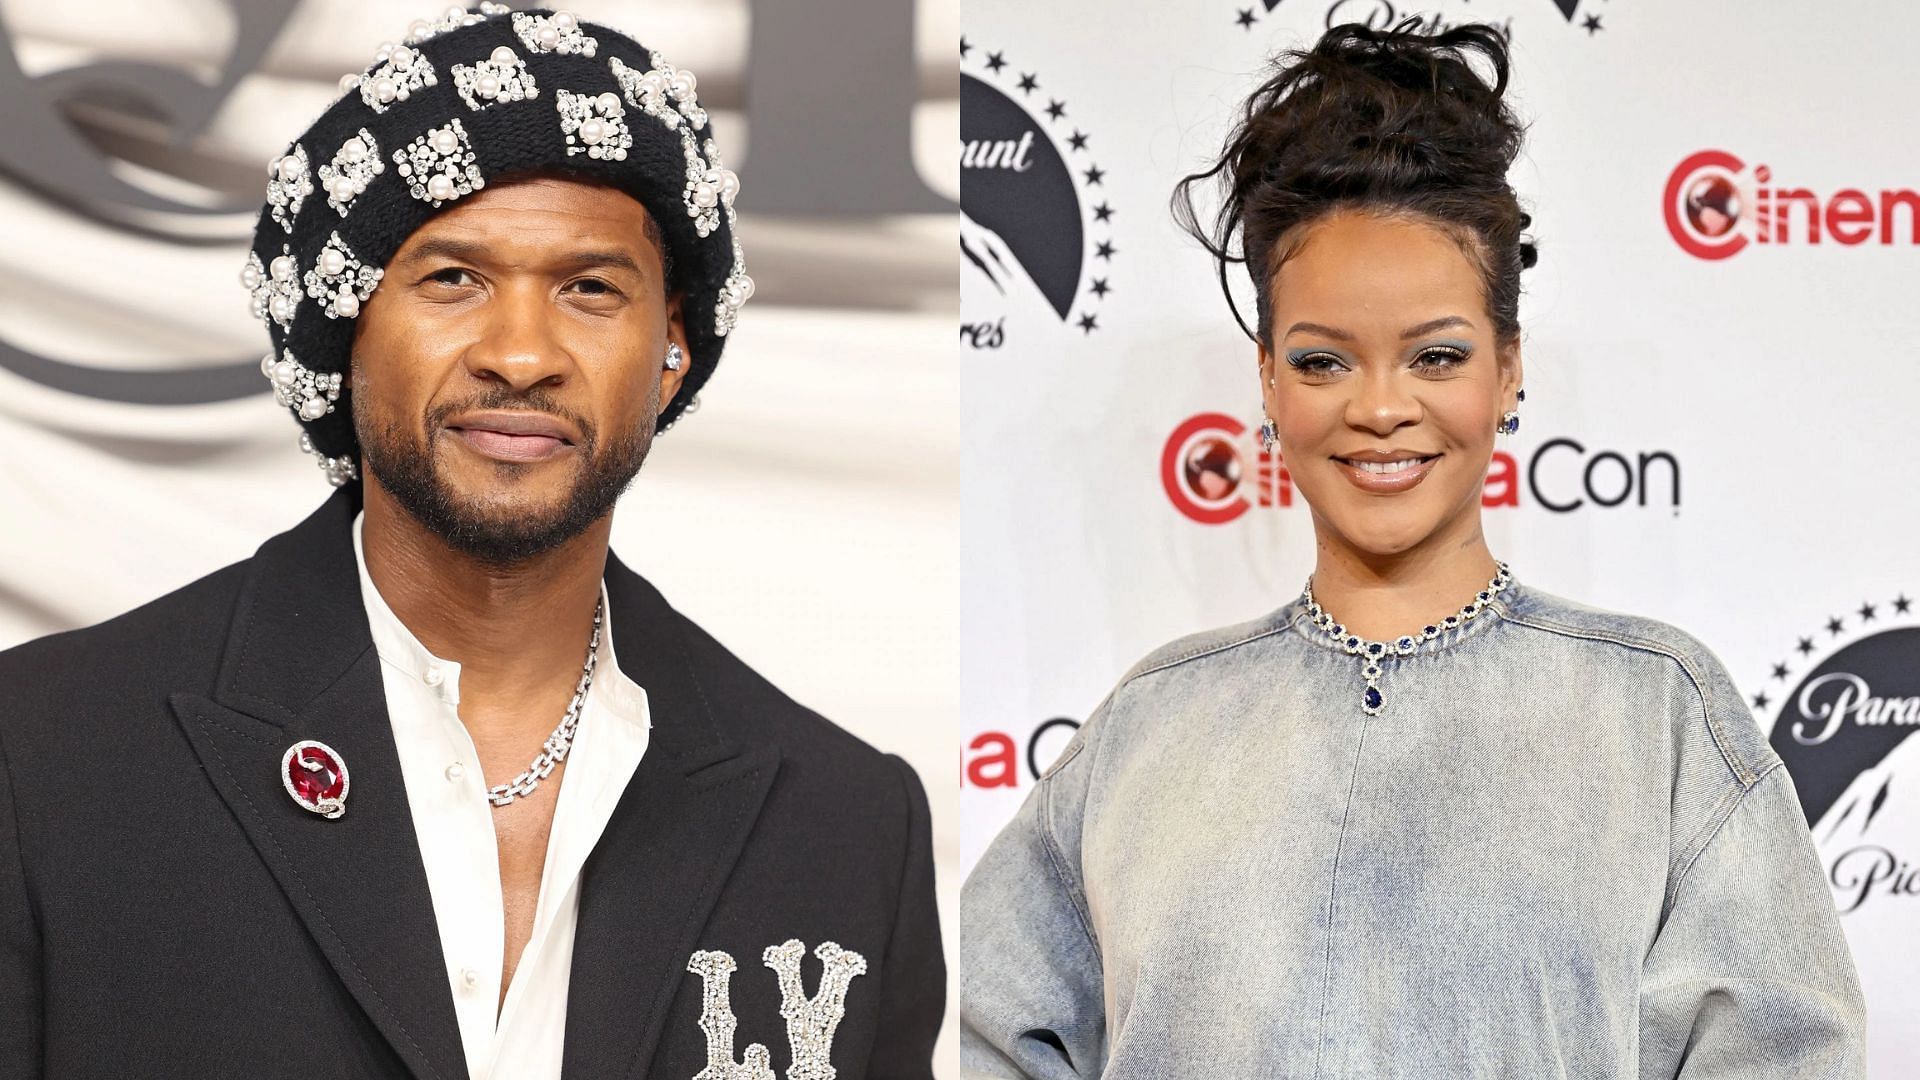 Usher will headline the Super Bowl halftime show a year after Rihanna had her turn.